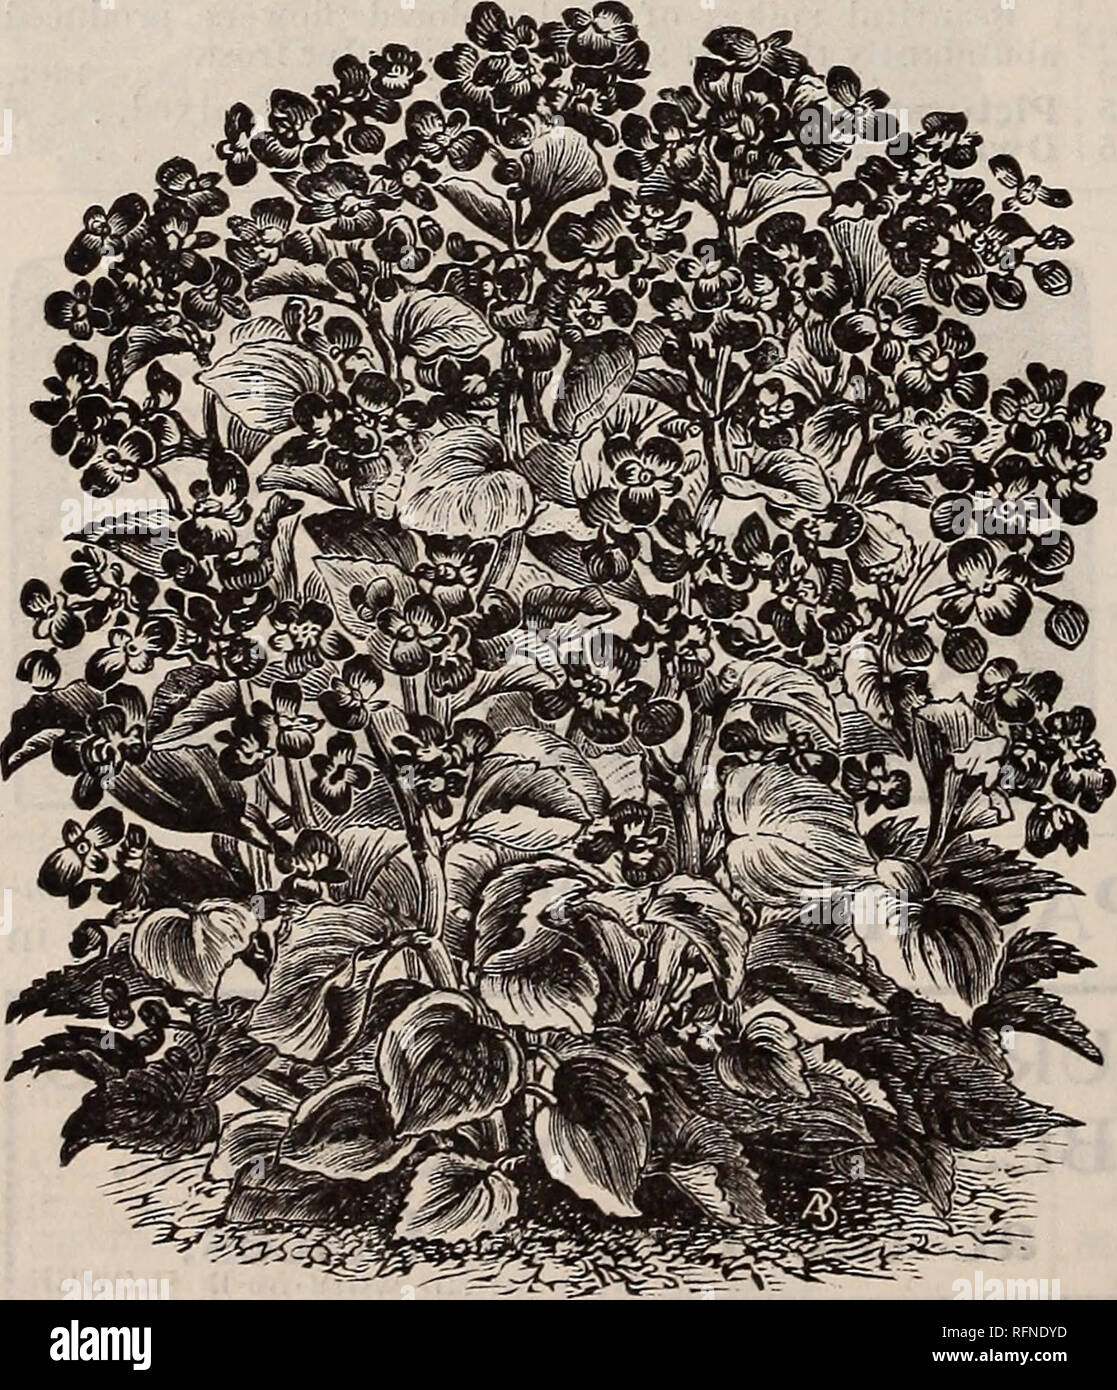 . Burpee's farm annual written at Fordhook Farm. Nurseries (Horticulture) Pennsylvania Philadelphia Catalogs; Vegetables Seeds Catalogs; Plants, Ornamental Catalogs; Flowers Seeds Catalogs. BURPEE'S CAMELLIA=FLOWERED BALSAM. In large size and perfect form, Burpee's' Superb Camellia-Flowered Balsams are without a rival, except in Burpee's Defiance. The flowers, borne in wonderful profusion, resemble the Camellia in form, and are often fully as double; most of the varieties are of extraordinary size, frequently more than two inches in diameter. From our extensive cultures—and we are the largest  Stock Photo